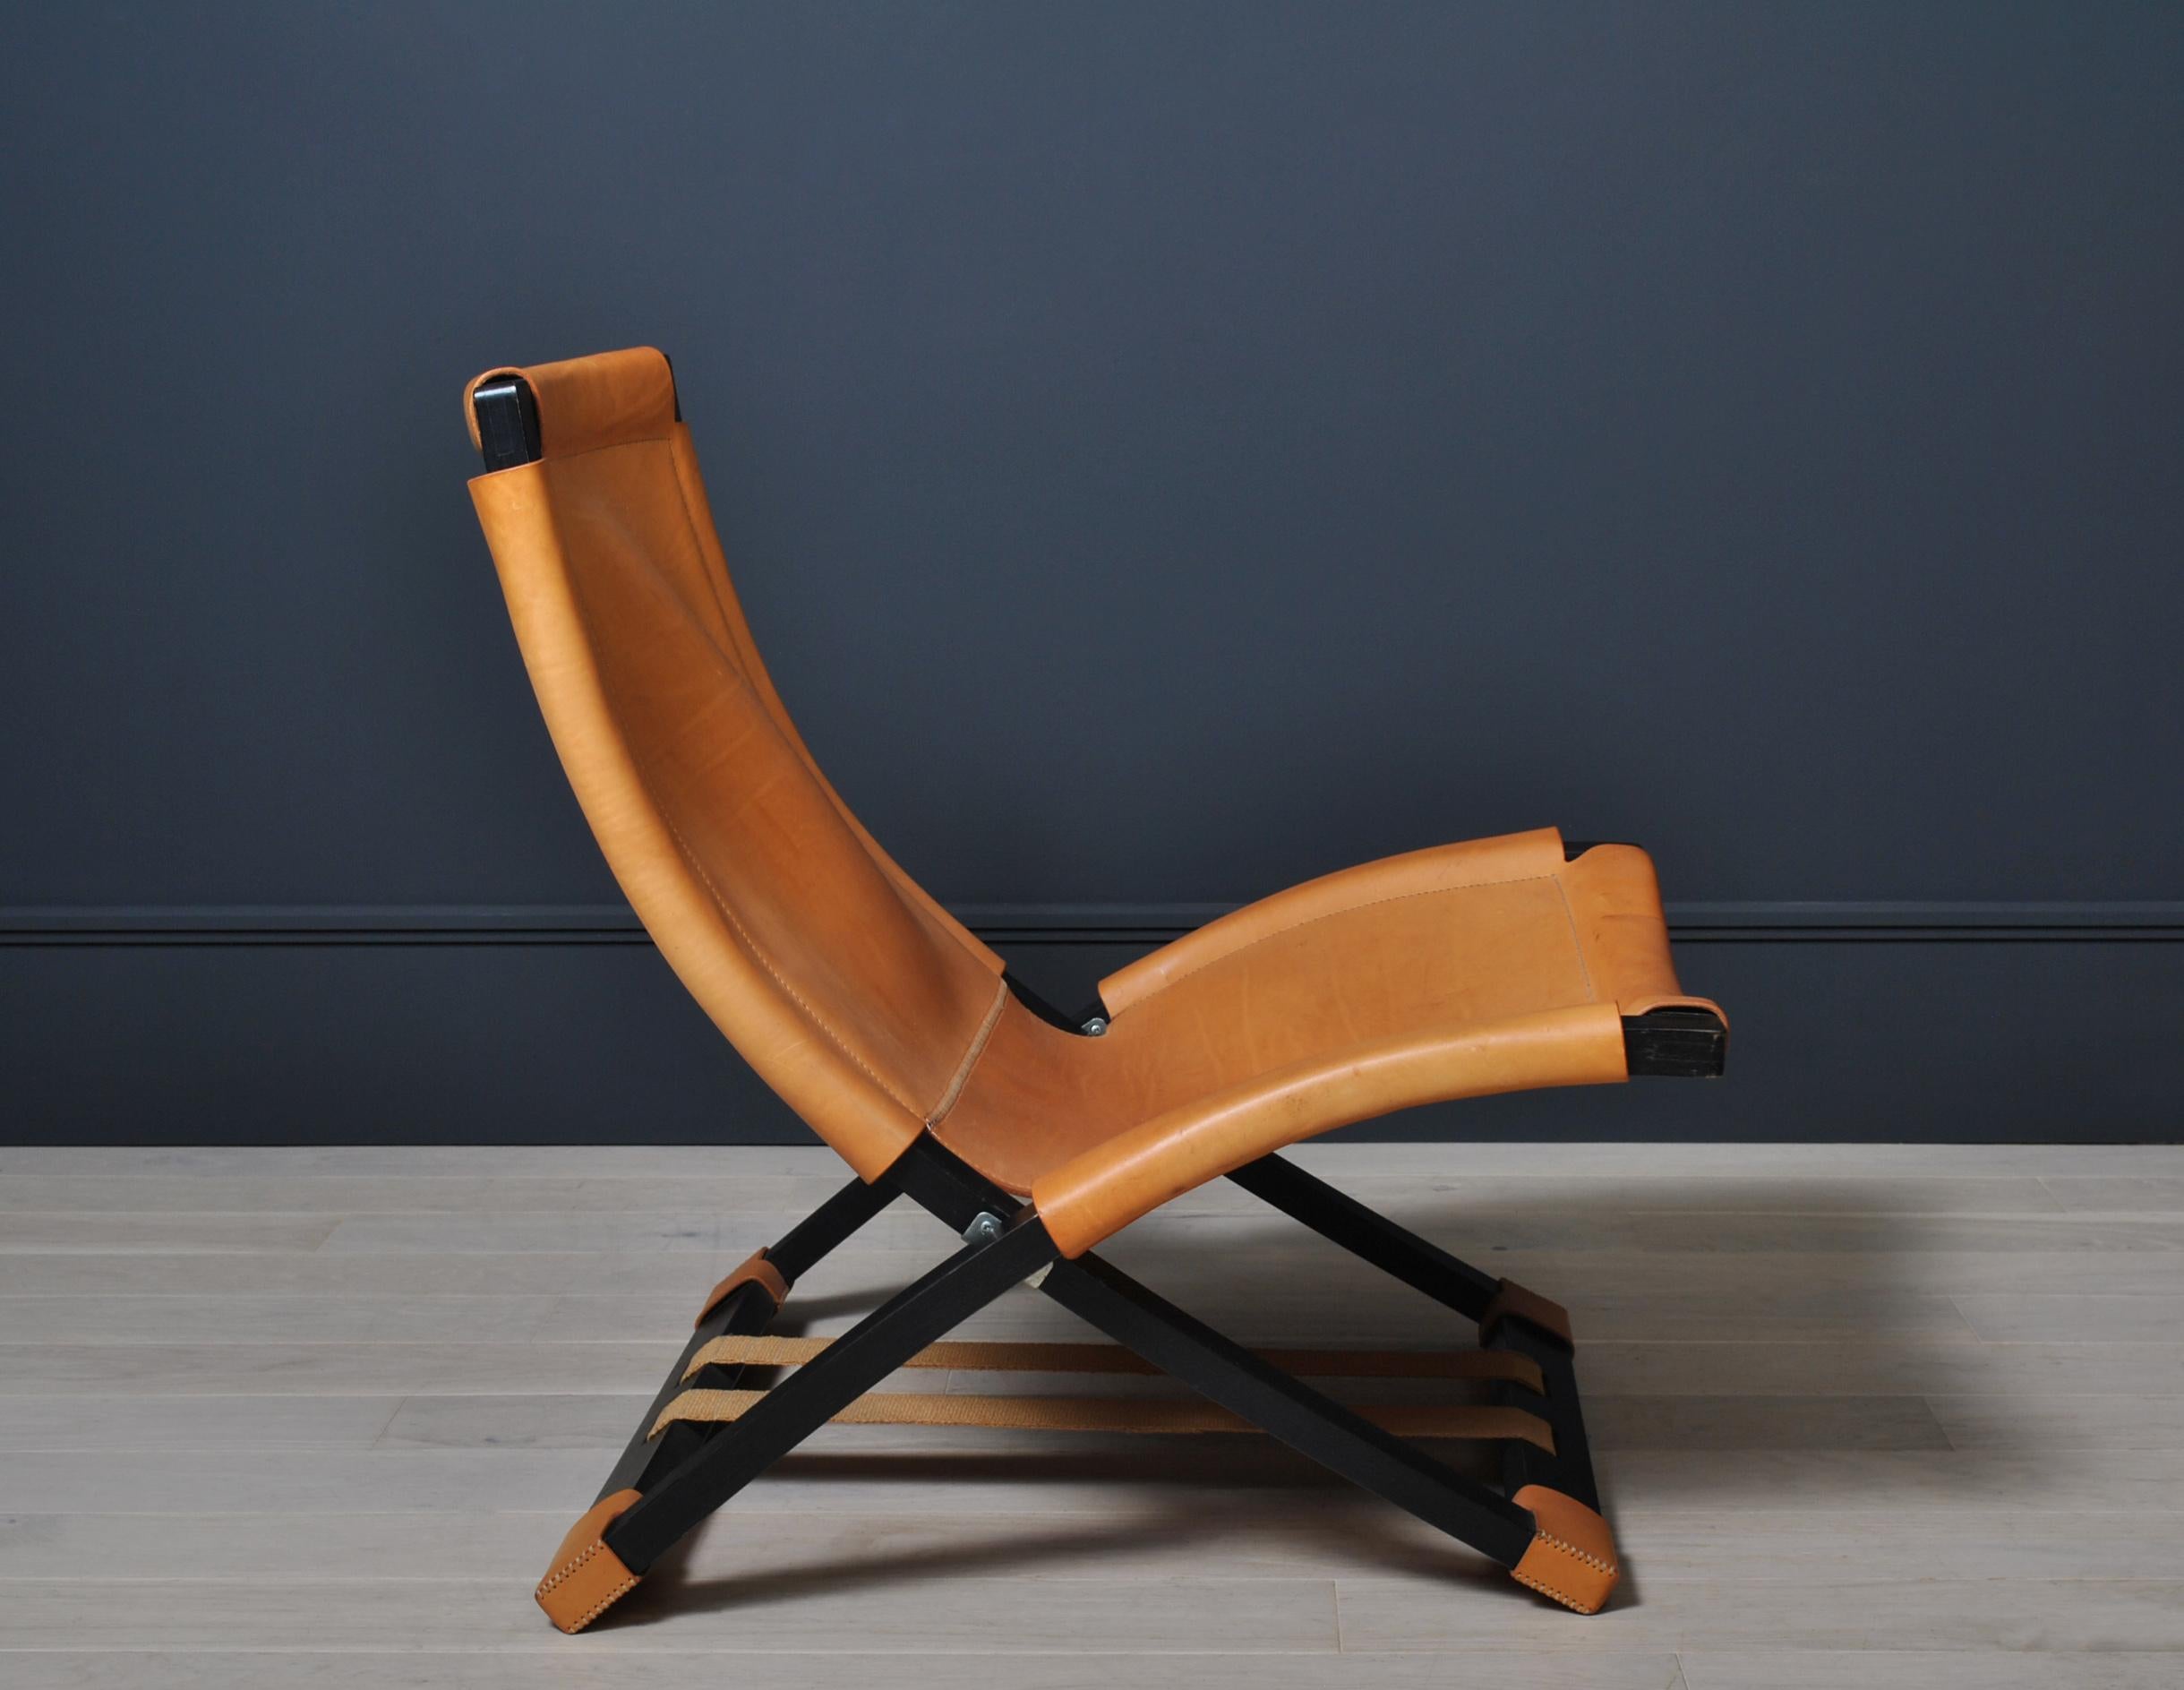 Special commission tan bridle leather upholstered X frame folding chairs by Ingmar Relling for Westnofa, Norway circa 1960’s.
Original labels intact.
Cleaned, polished and conditioned.